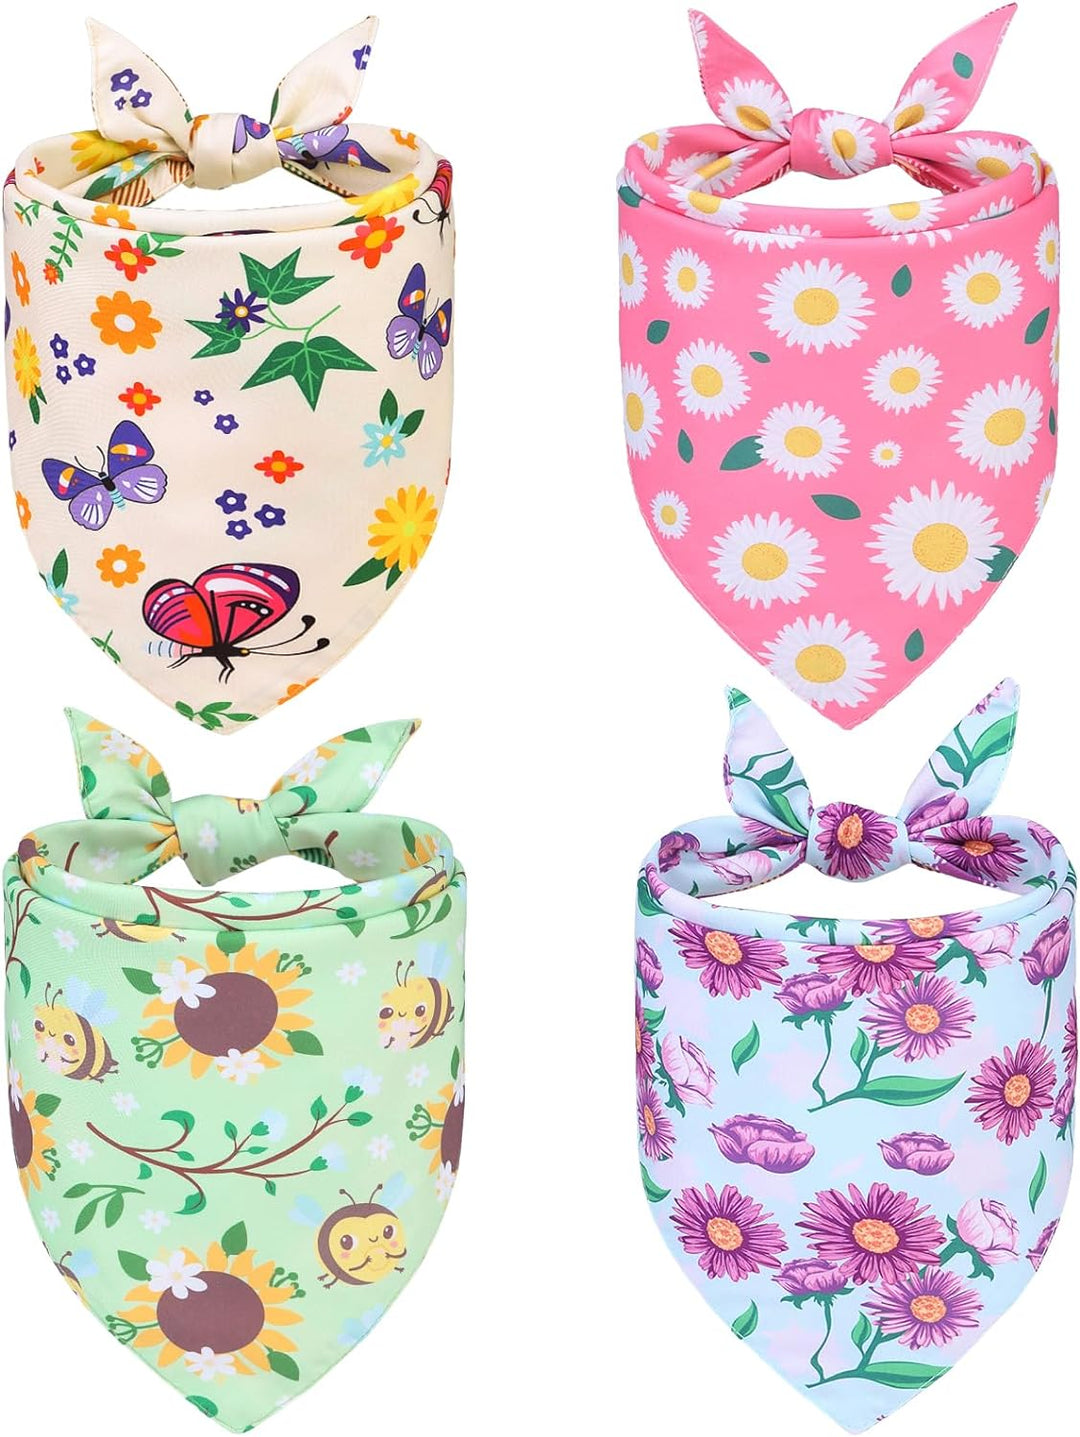 Spring Dog Bandanas 4Pcs Outfit - Soft Pet Triangle Bibs Scarf, Pet Accessories Gifts for Small Medium Large Dog Cat Boy Girl